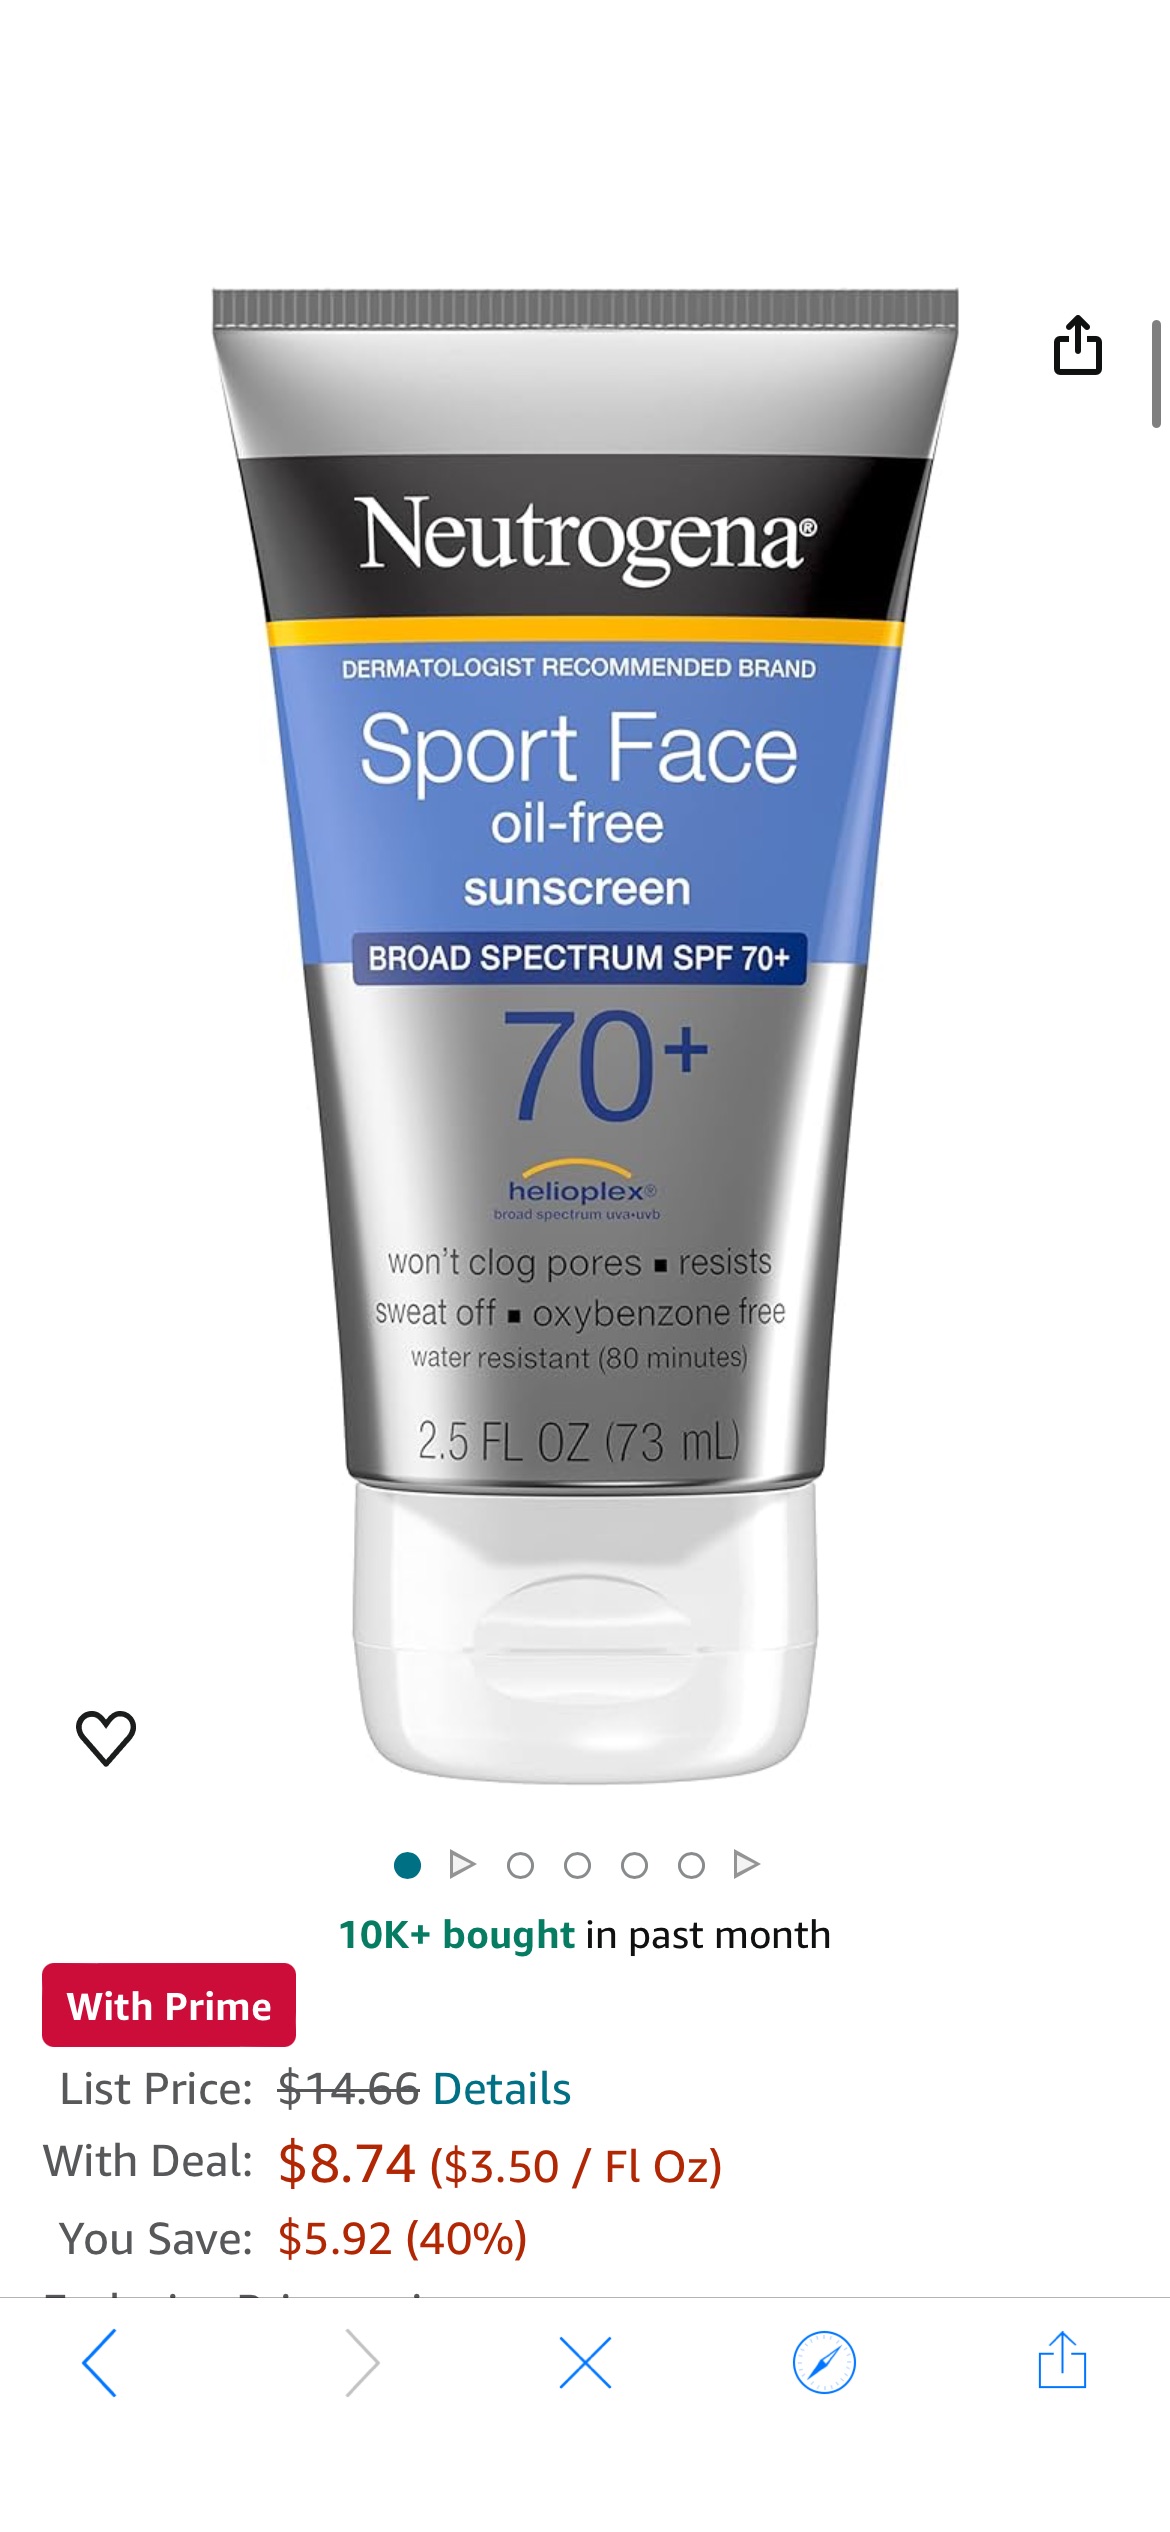 Amazon.com: Neutrogena Sport Face Sunscreen SPF 70+, Oil-Free Facial Sunscreen Lotion with Broad Spectrum UVA/UVB Sun Protection, Sweat-Resistant & Water-Resistant, 2.5 fl. oz : Beauty & Personal Care